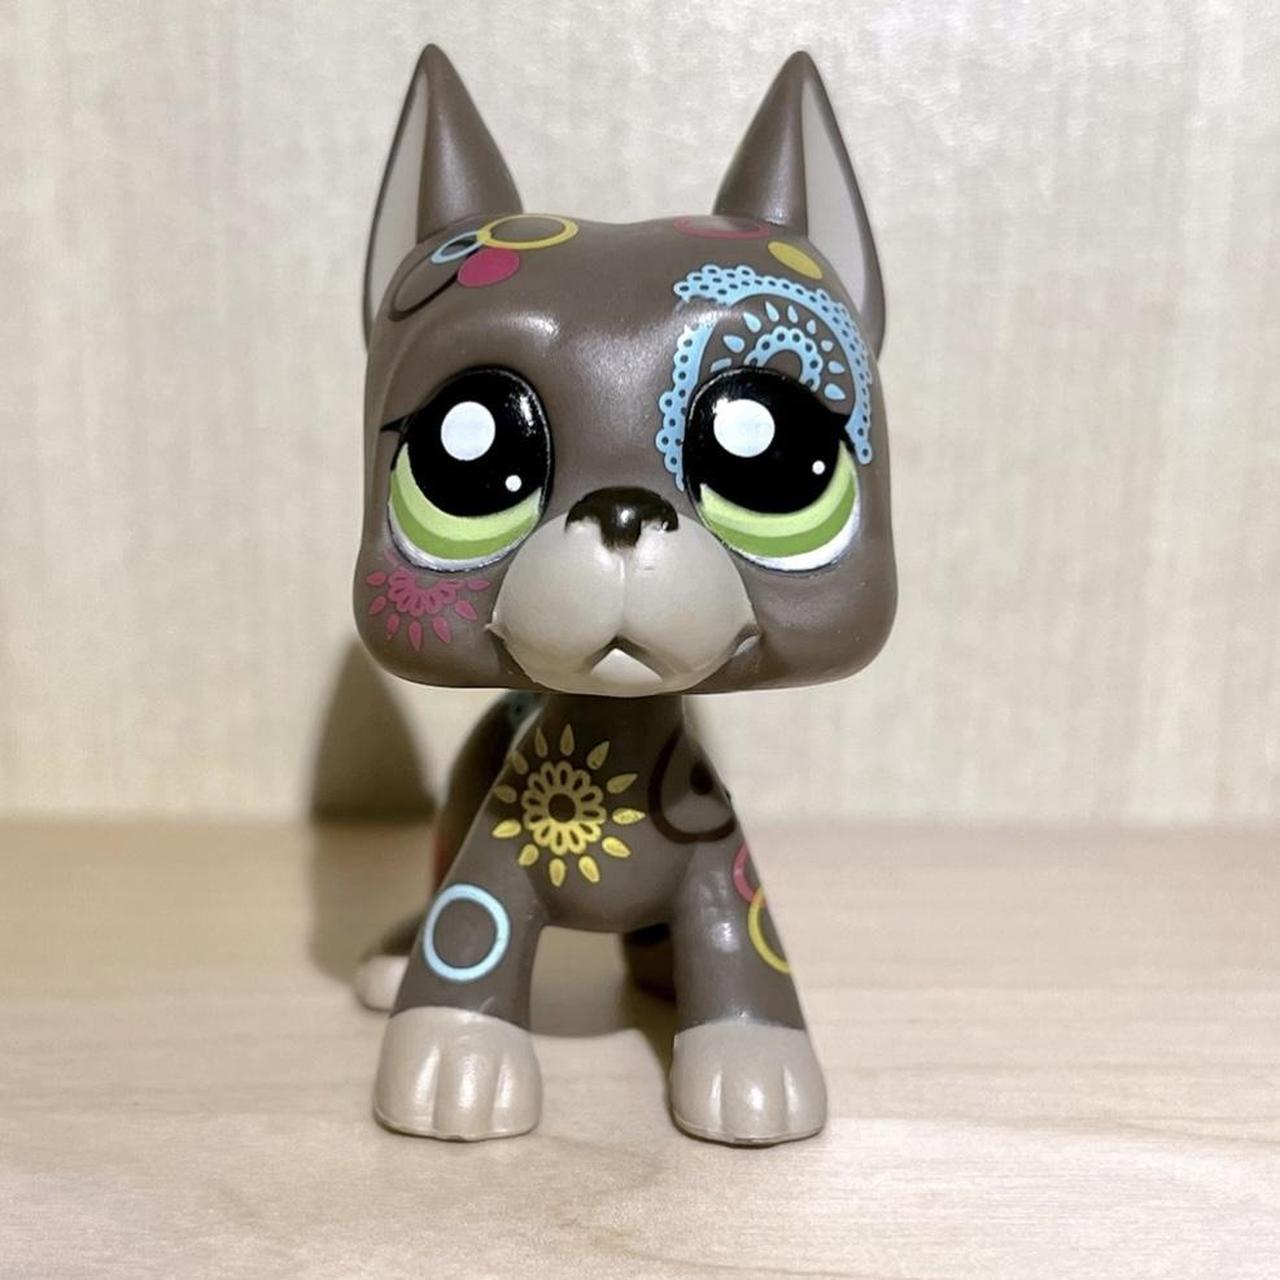 Toy Review: Littlest Pet Shop Playsets!